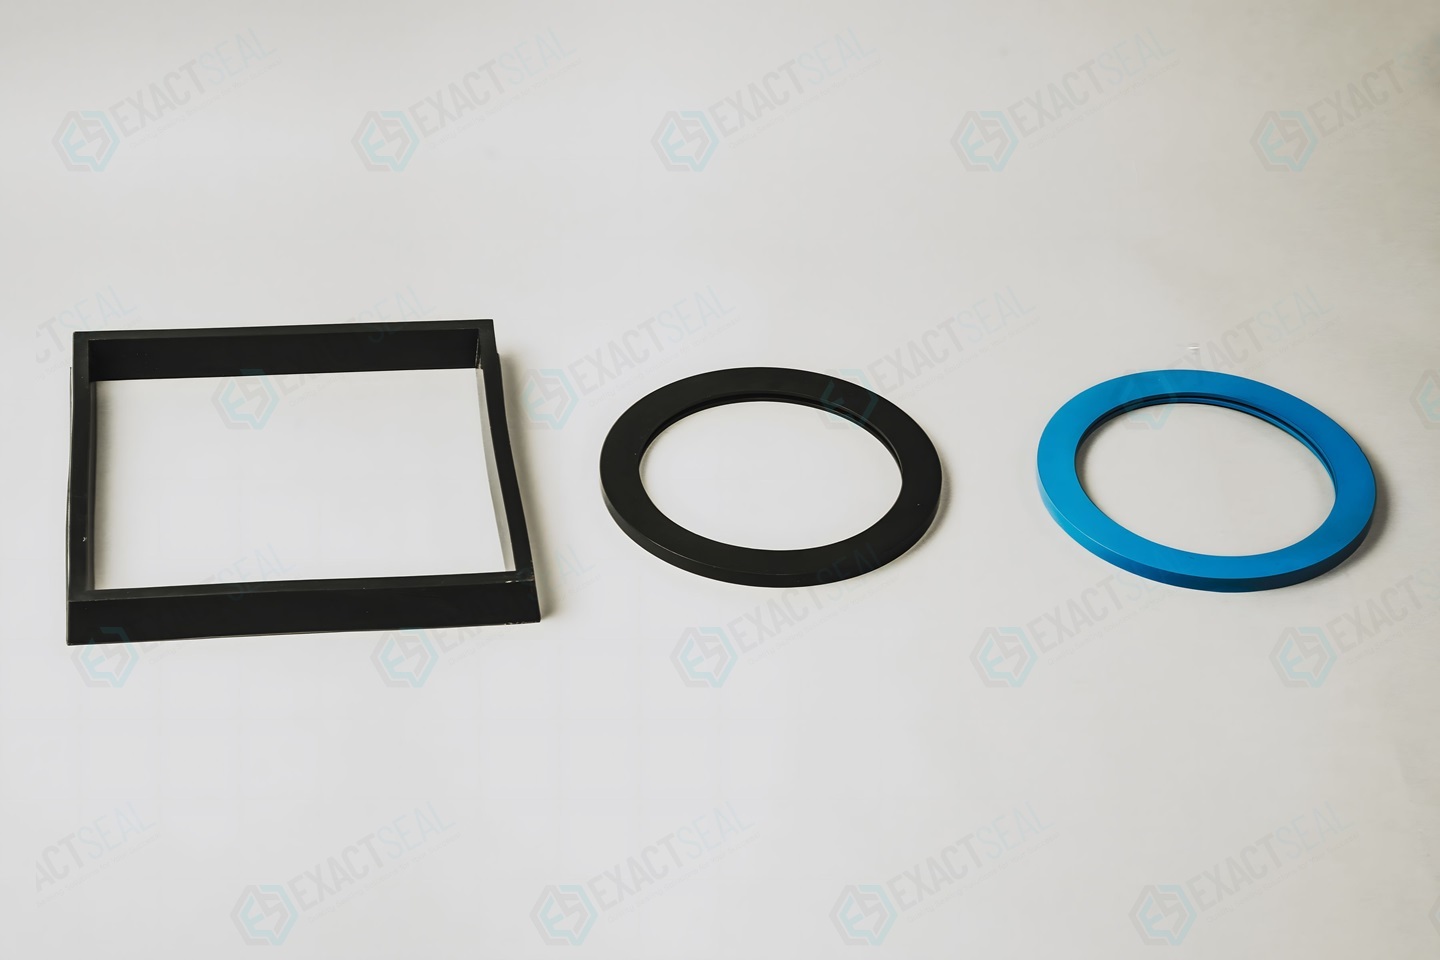 Fluorosilicone Seal & Gaskets